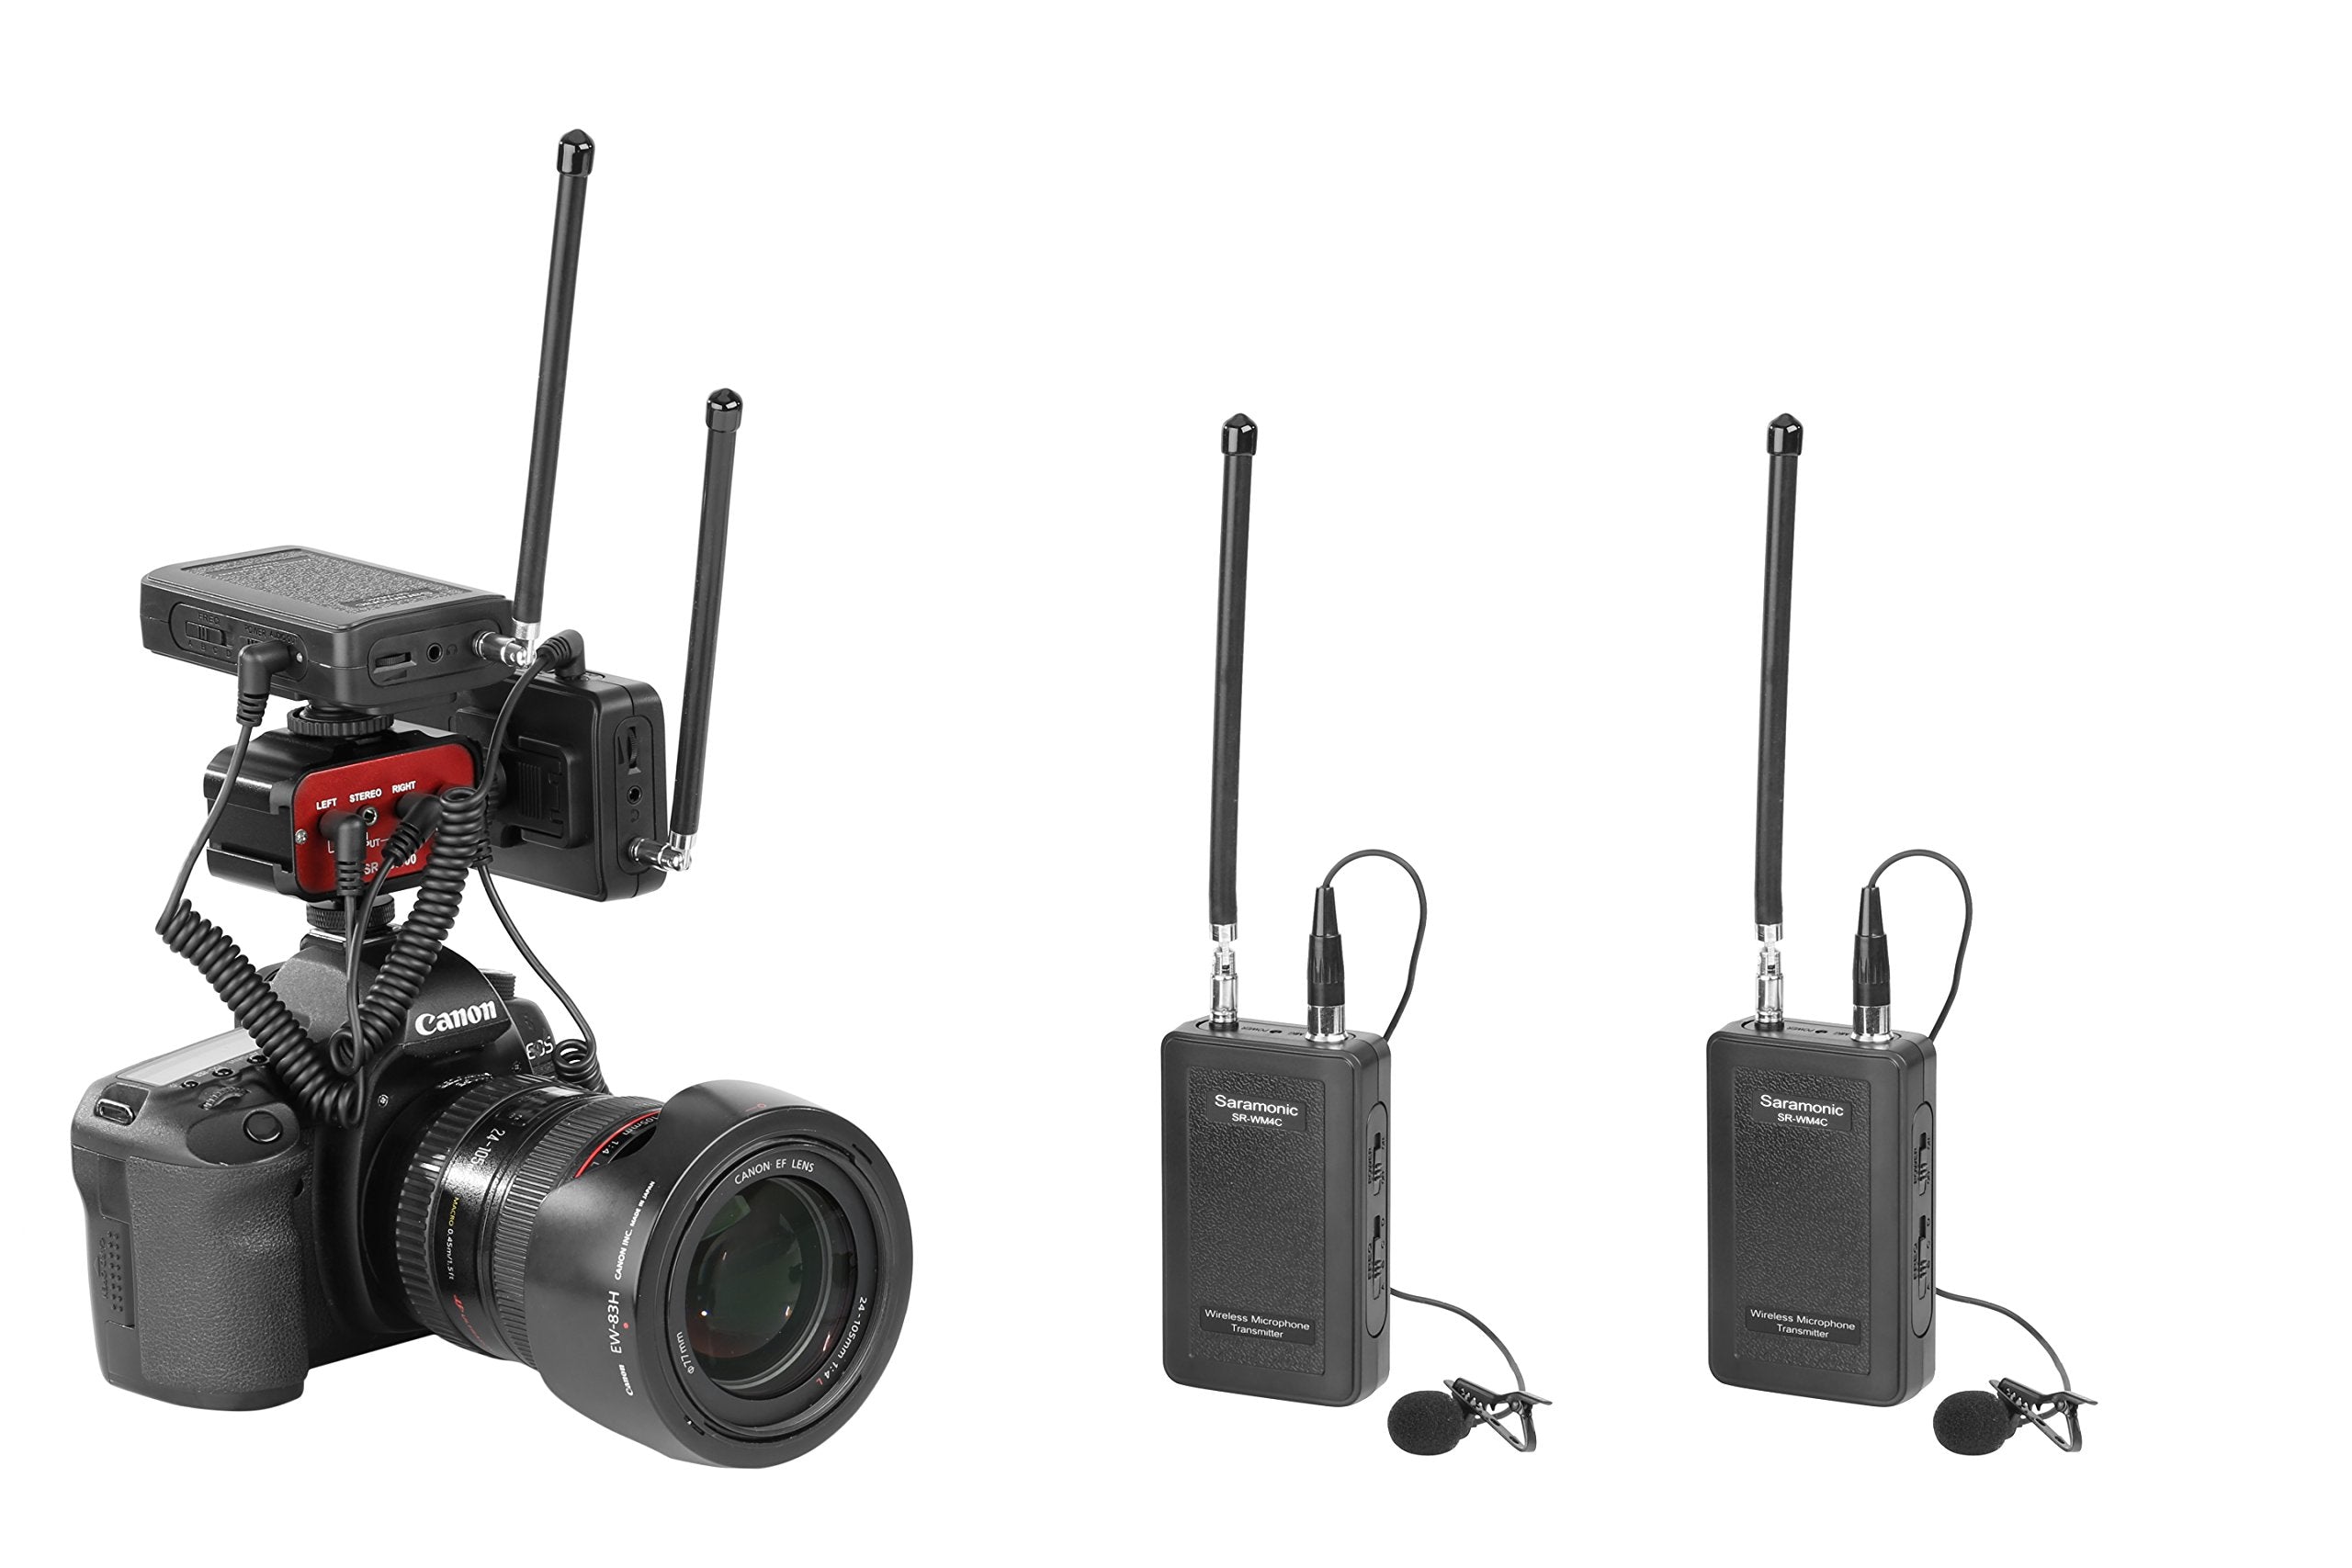 Saramonic Wireless VHF Lavalier Microphone Bundle with 2 Bodypack Transmitters, 2 Receivers, and 2-Ch Mixer for DSLR Cameras, Camcorders and More - 200' Wireless Transmission Range (Black, Red)  - Like New